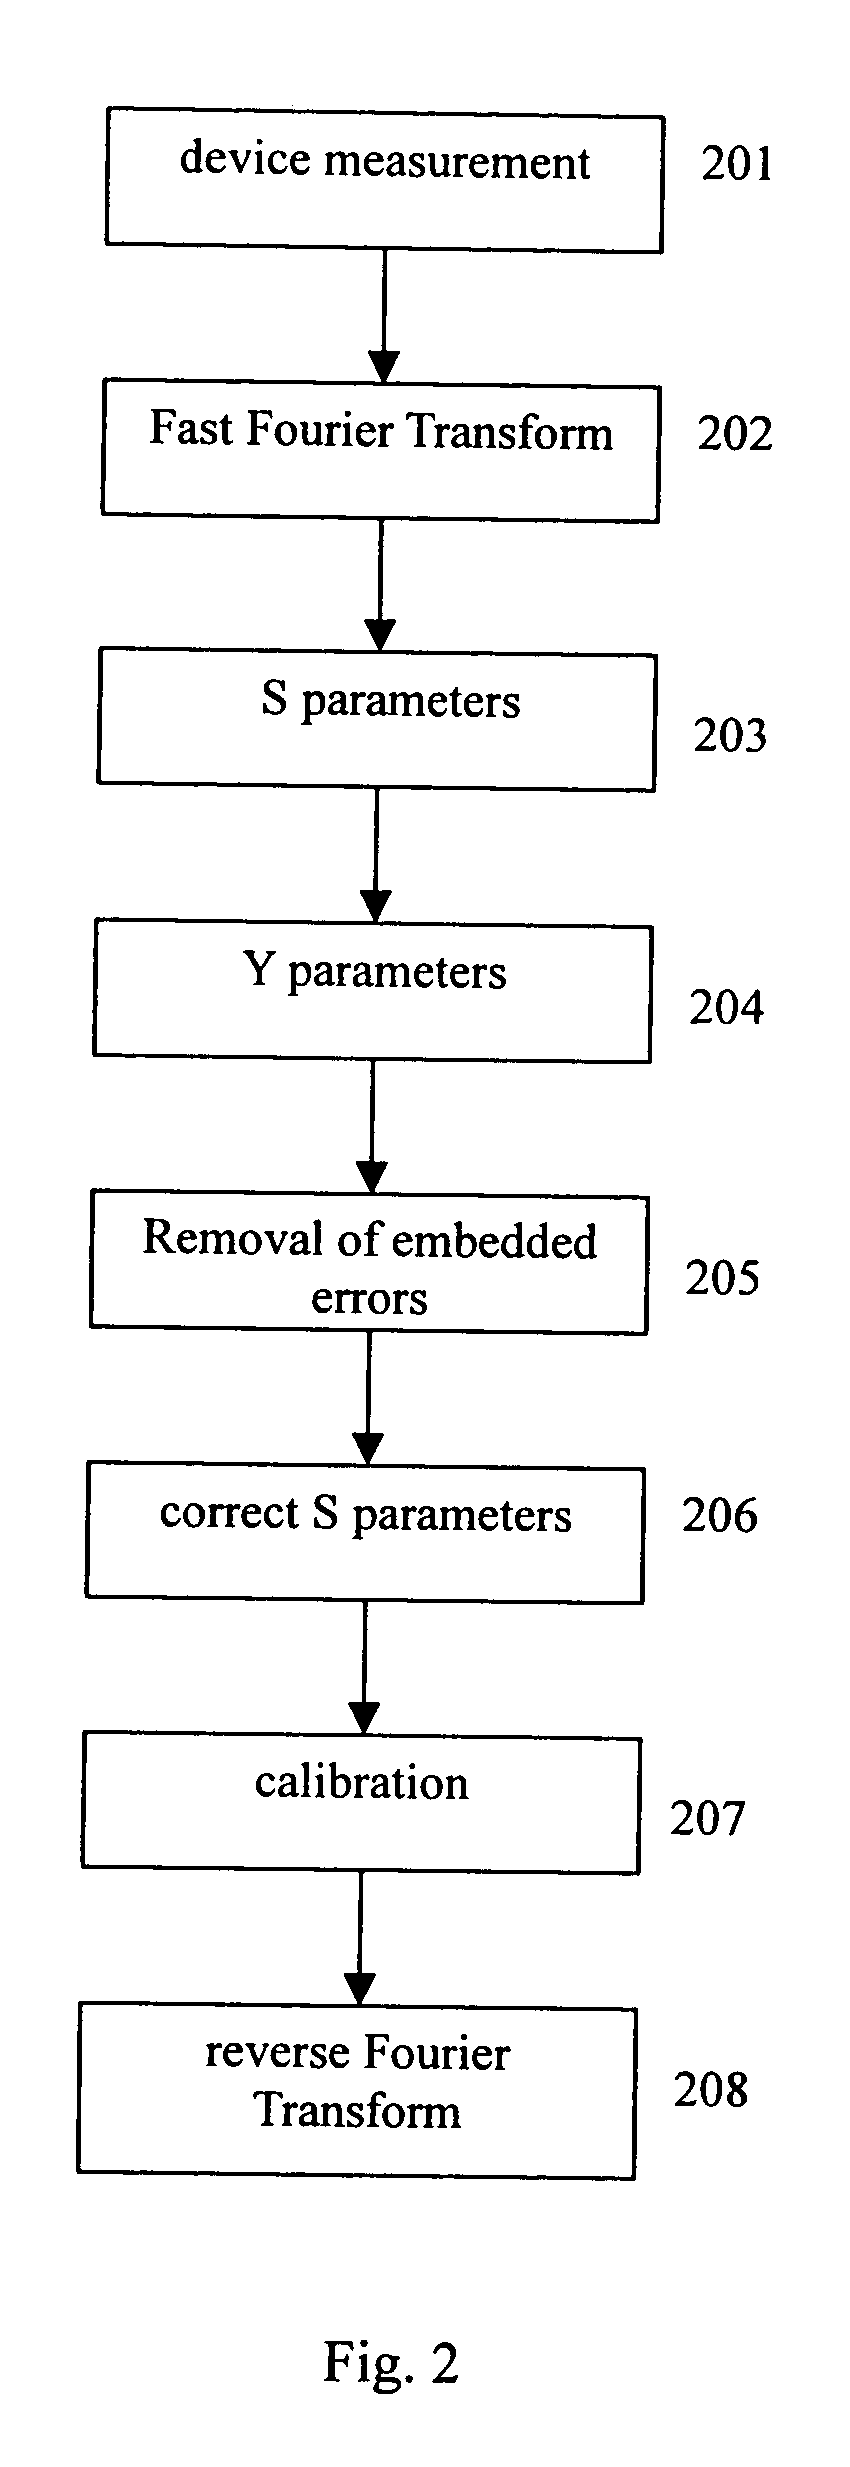 Method and system for wideband device measurement and modeling